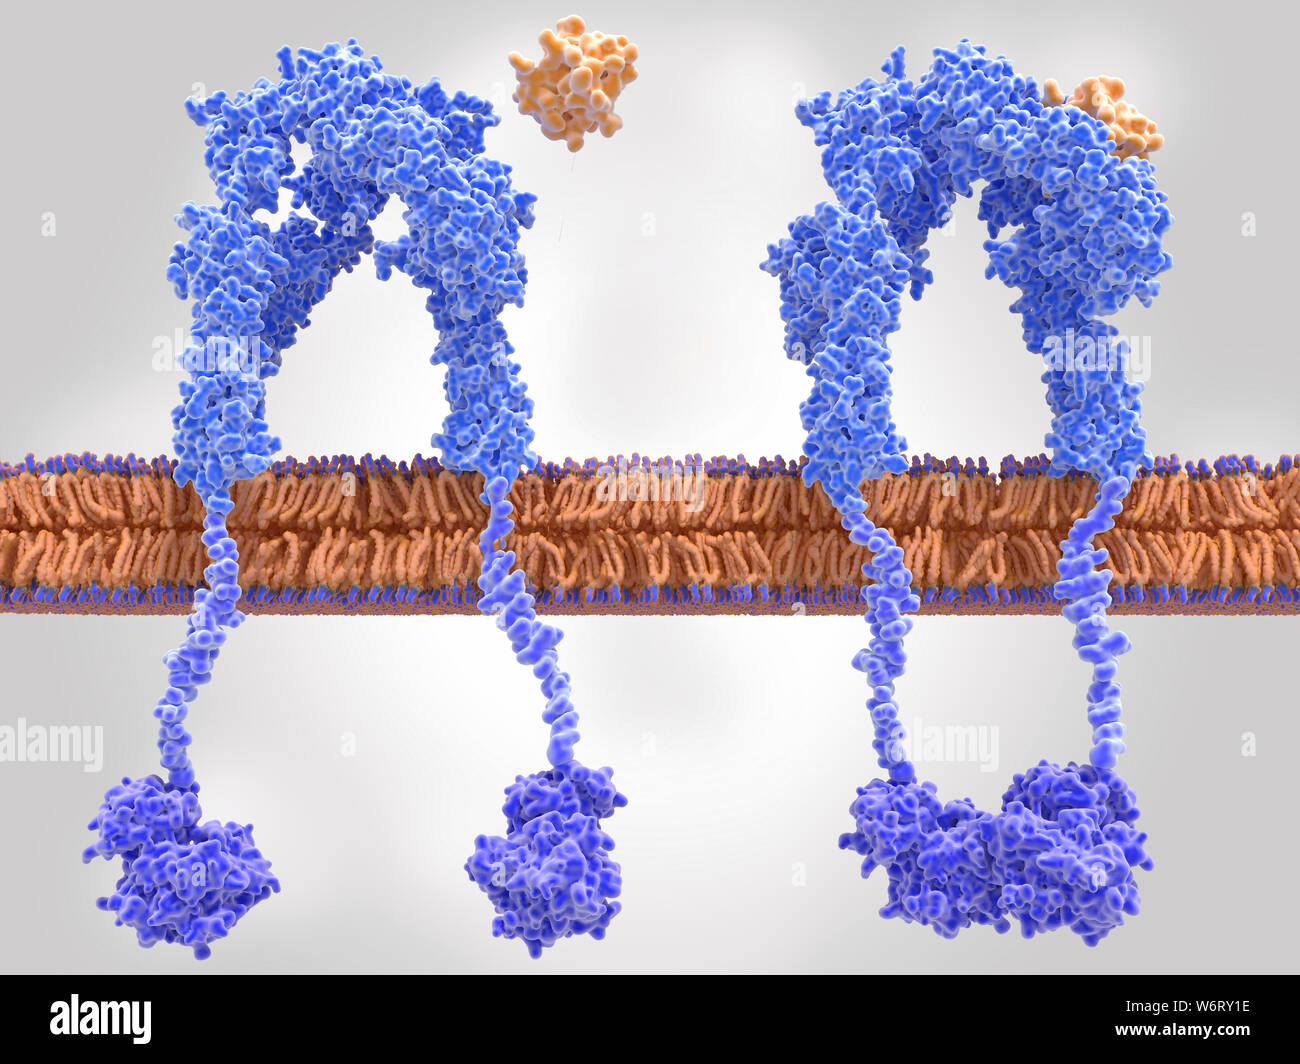 Active (right) and inactive (left) insulin receptors, illustration. The insulin receptor (blue) is a transmembrane protein which is activated through the binding of insulin (orange). Insulin binding (right) induces structural changes within the receptor. These changes trigger a biochemical chain of events inside the cell (signal transduction), that finally leads to the transport of glucose into the cell via activation of glucose transporters (channel proteins). If insulin is not bound (left), then the receptor remains inactive, and glucose cannot be transported across the cell membrane. Stock Photo